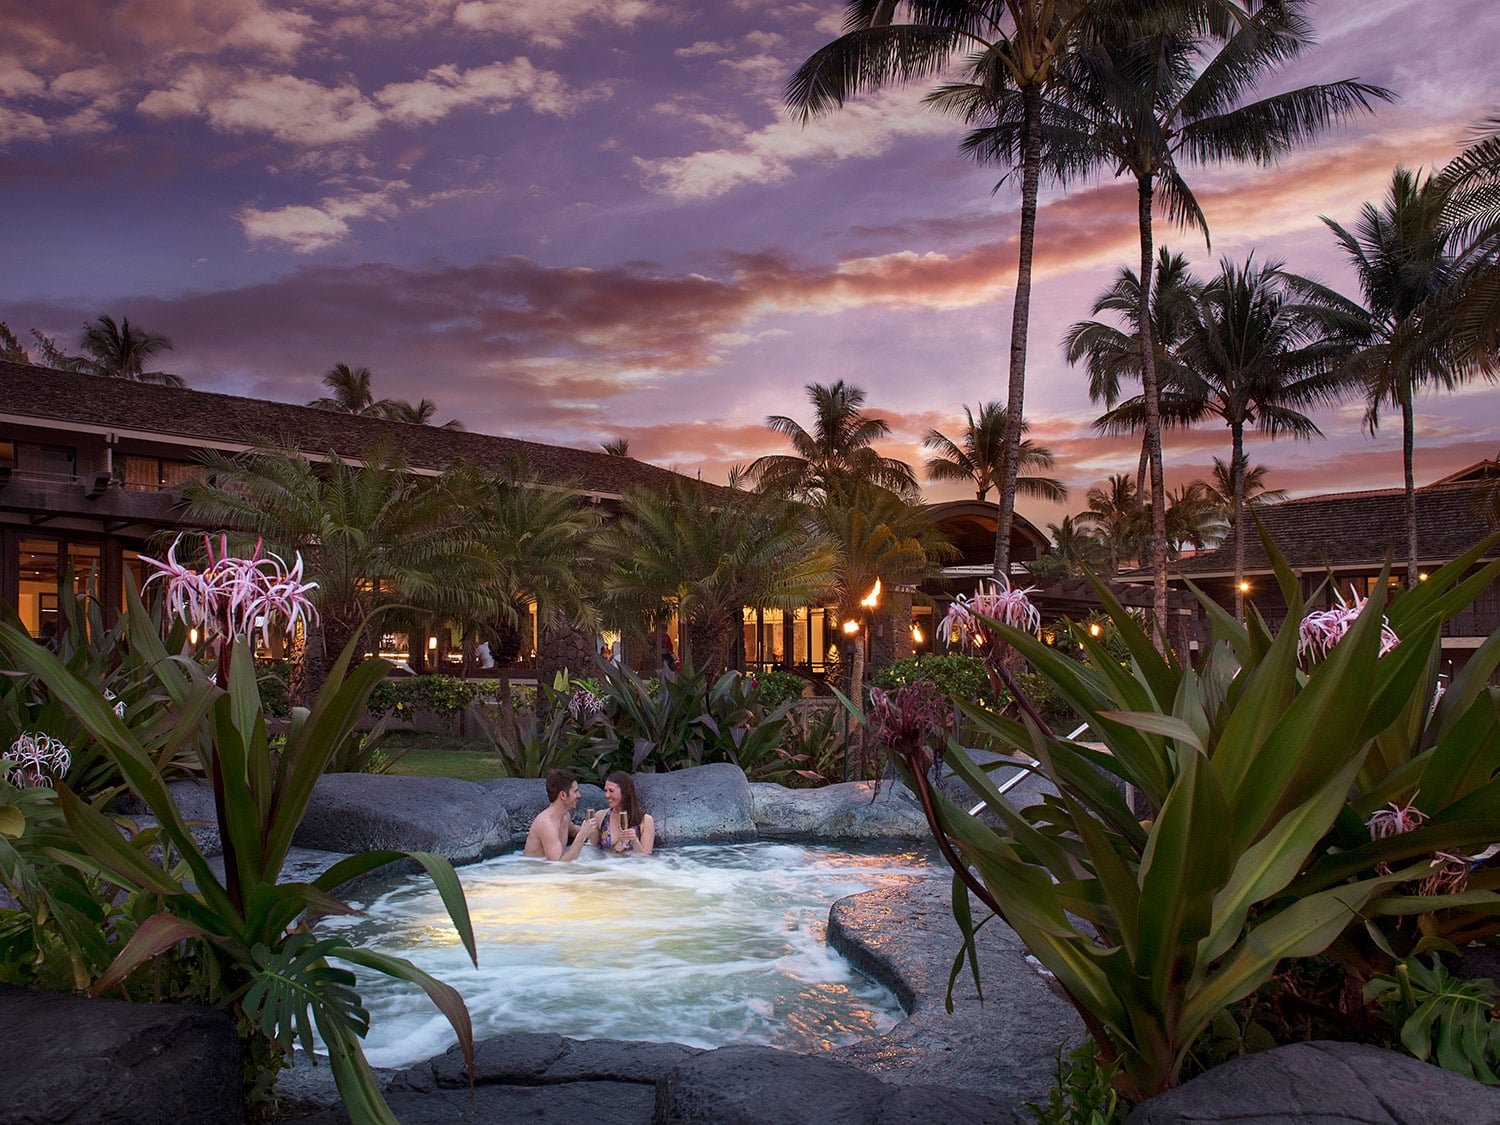 Most Romantic Hotels in Hawaii